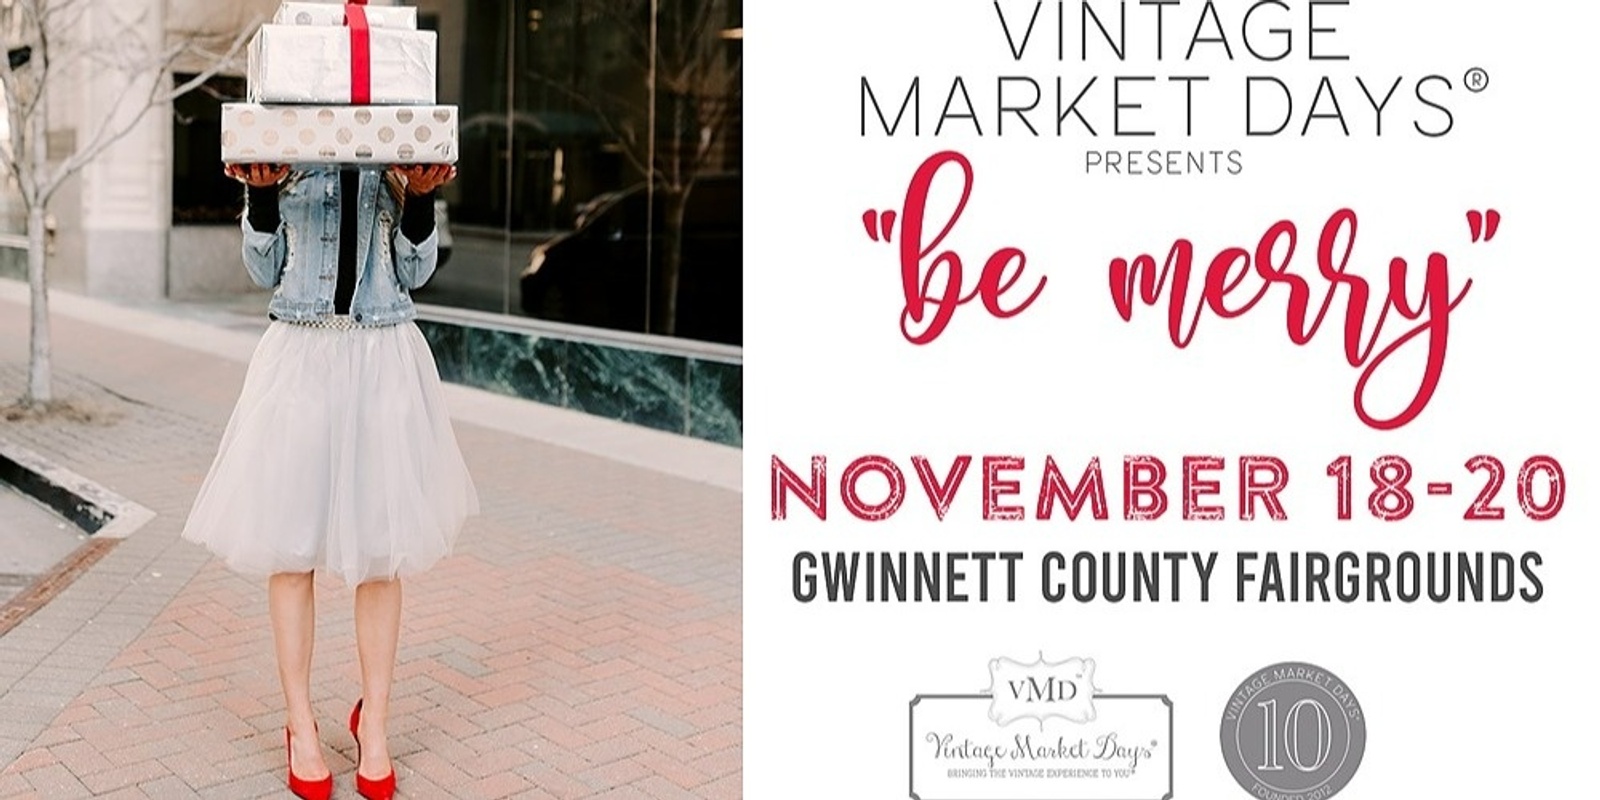 Vintage Market Days® of Greater Atlanta presents "be merry"